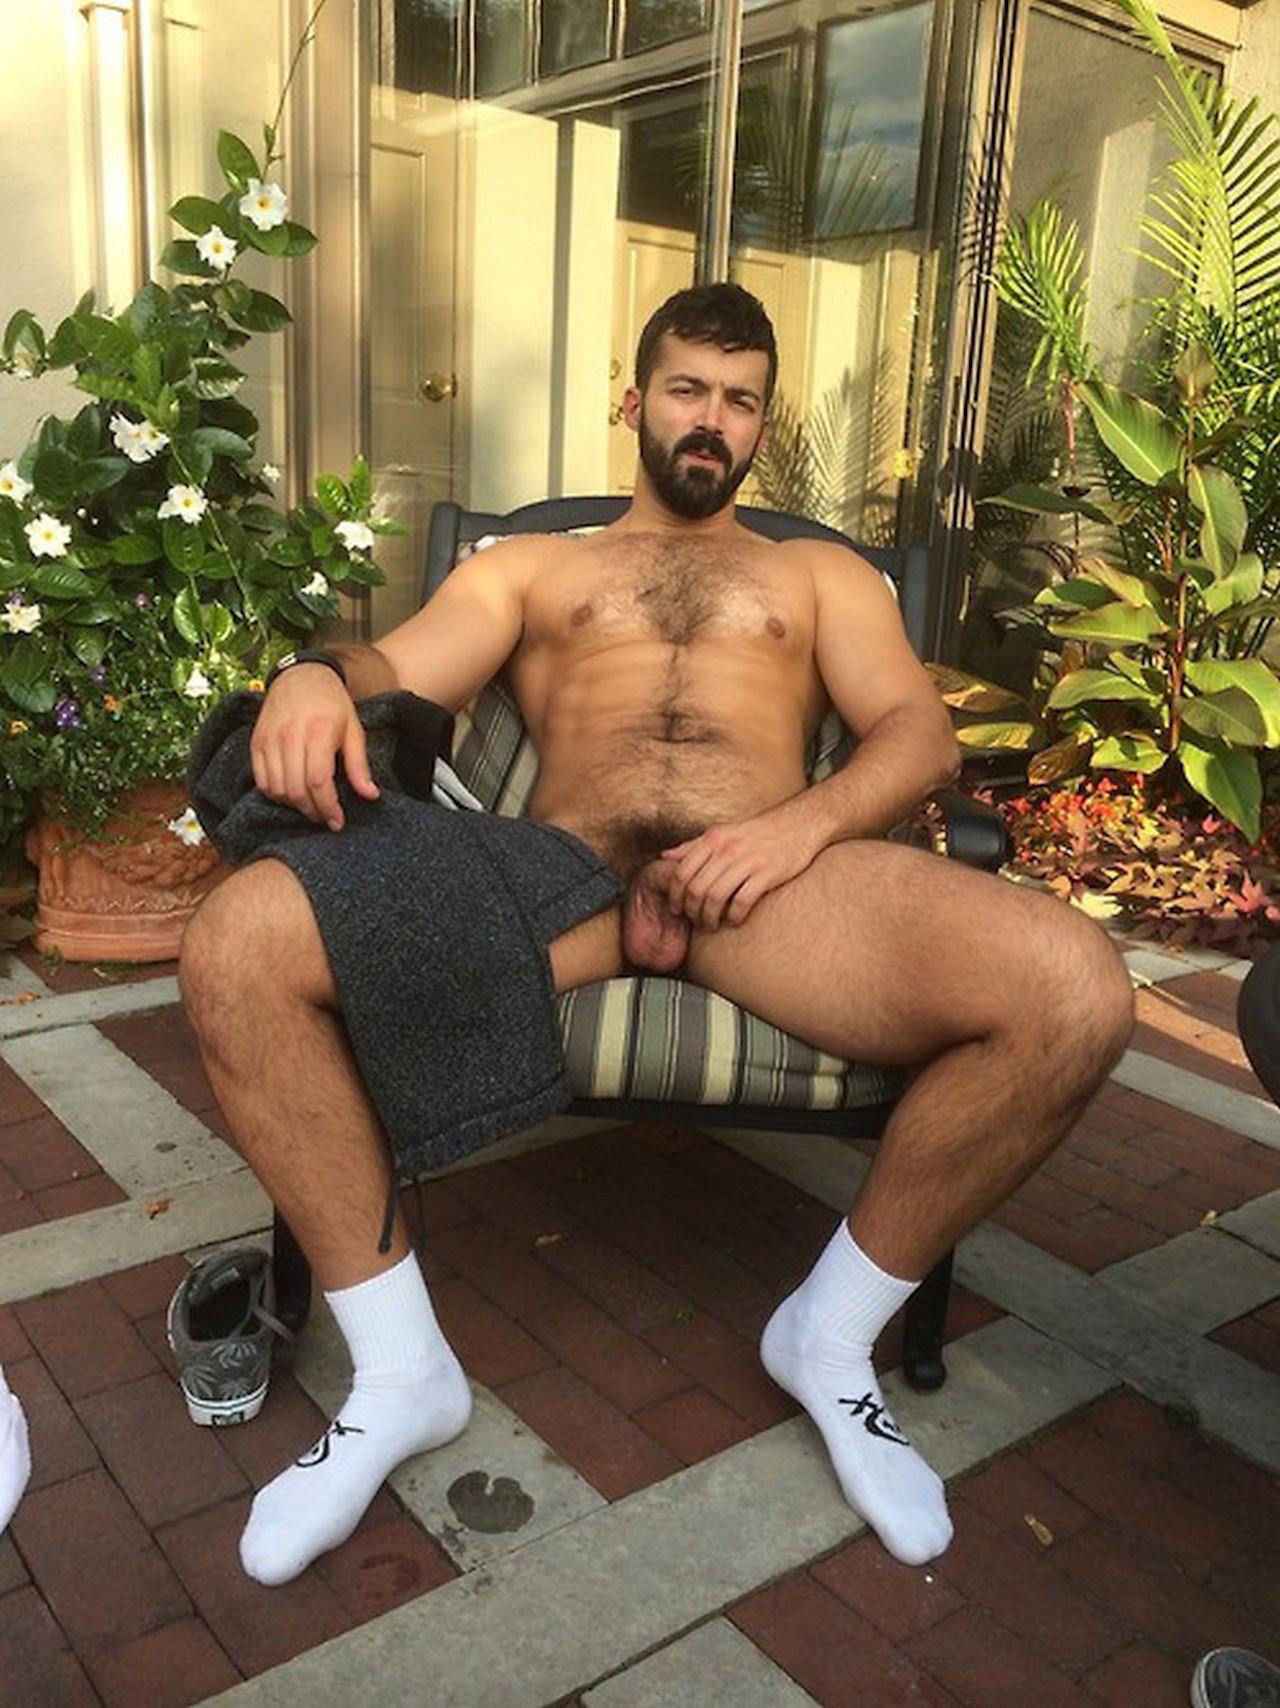 Photo by Smitty with the username @Resol702,  August 19, 2019 at 3:10 PM. The post is about the topic Gay Hairy Men